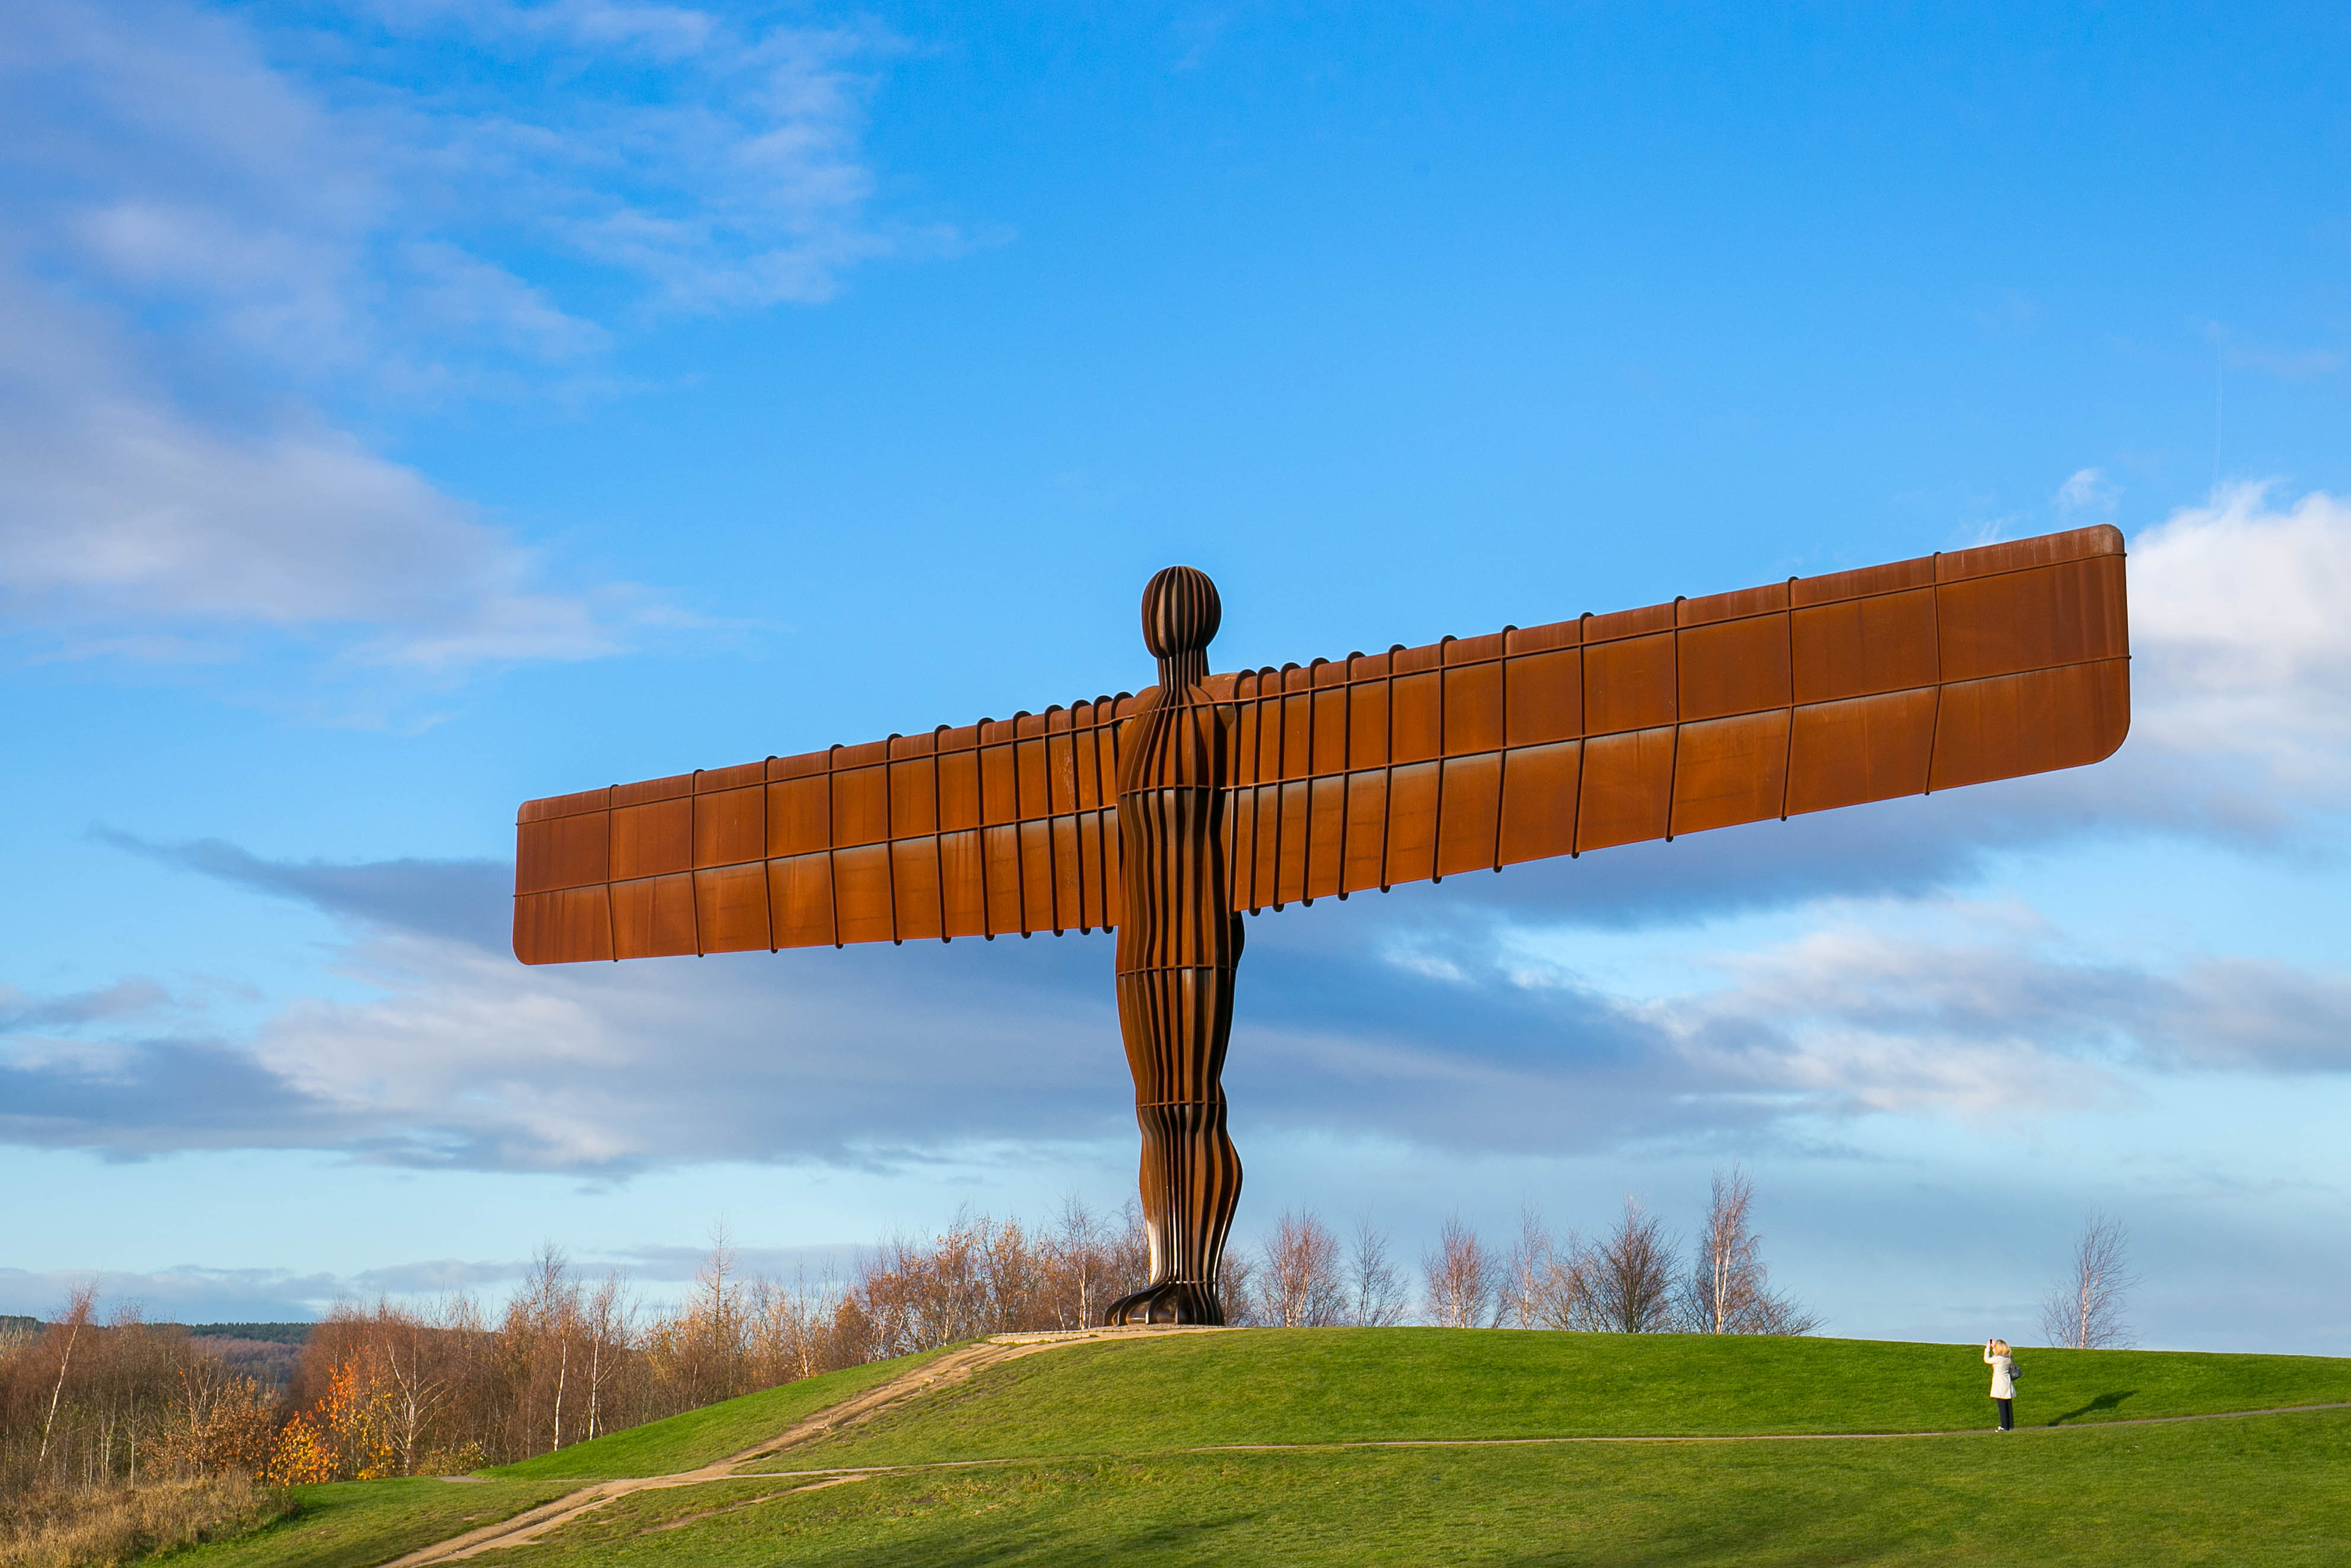 An image of the Angel of the North. It stands upright in a field in day time above the fields and trees.